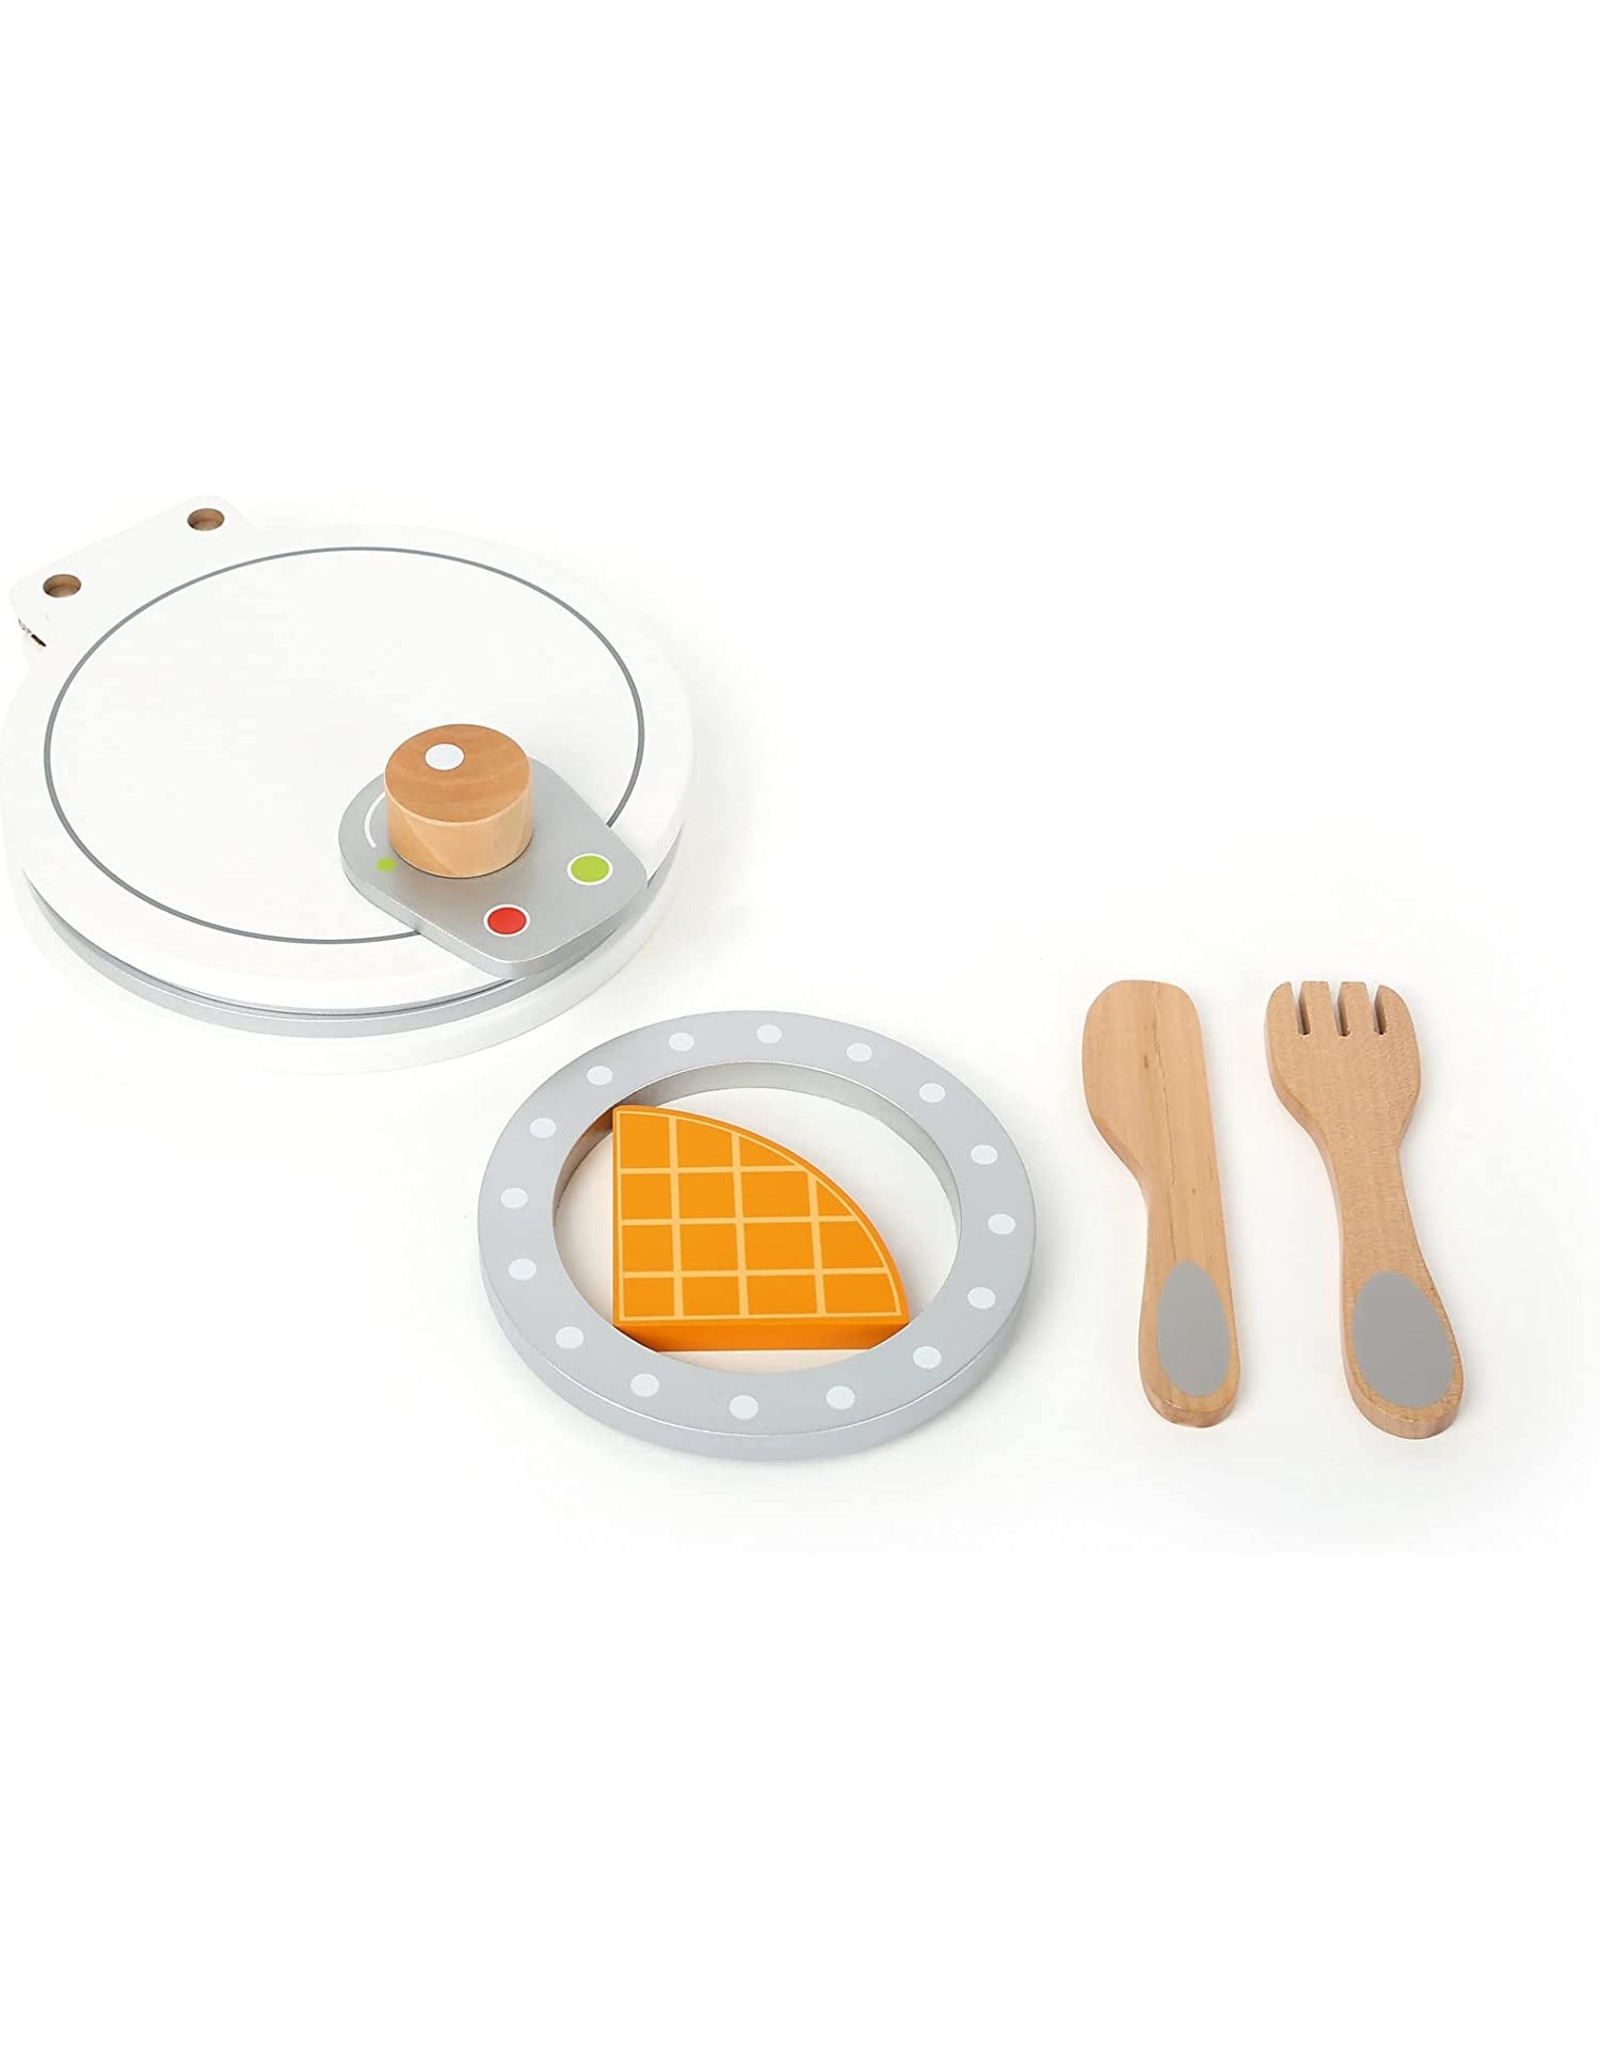 Waffle Iron for Play Kitchens